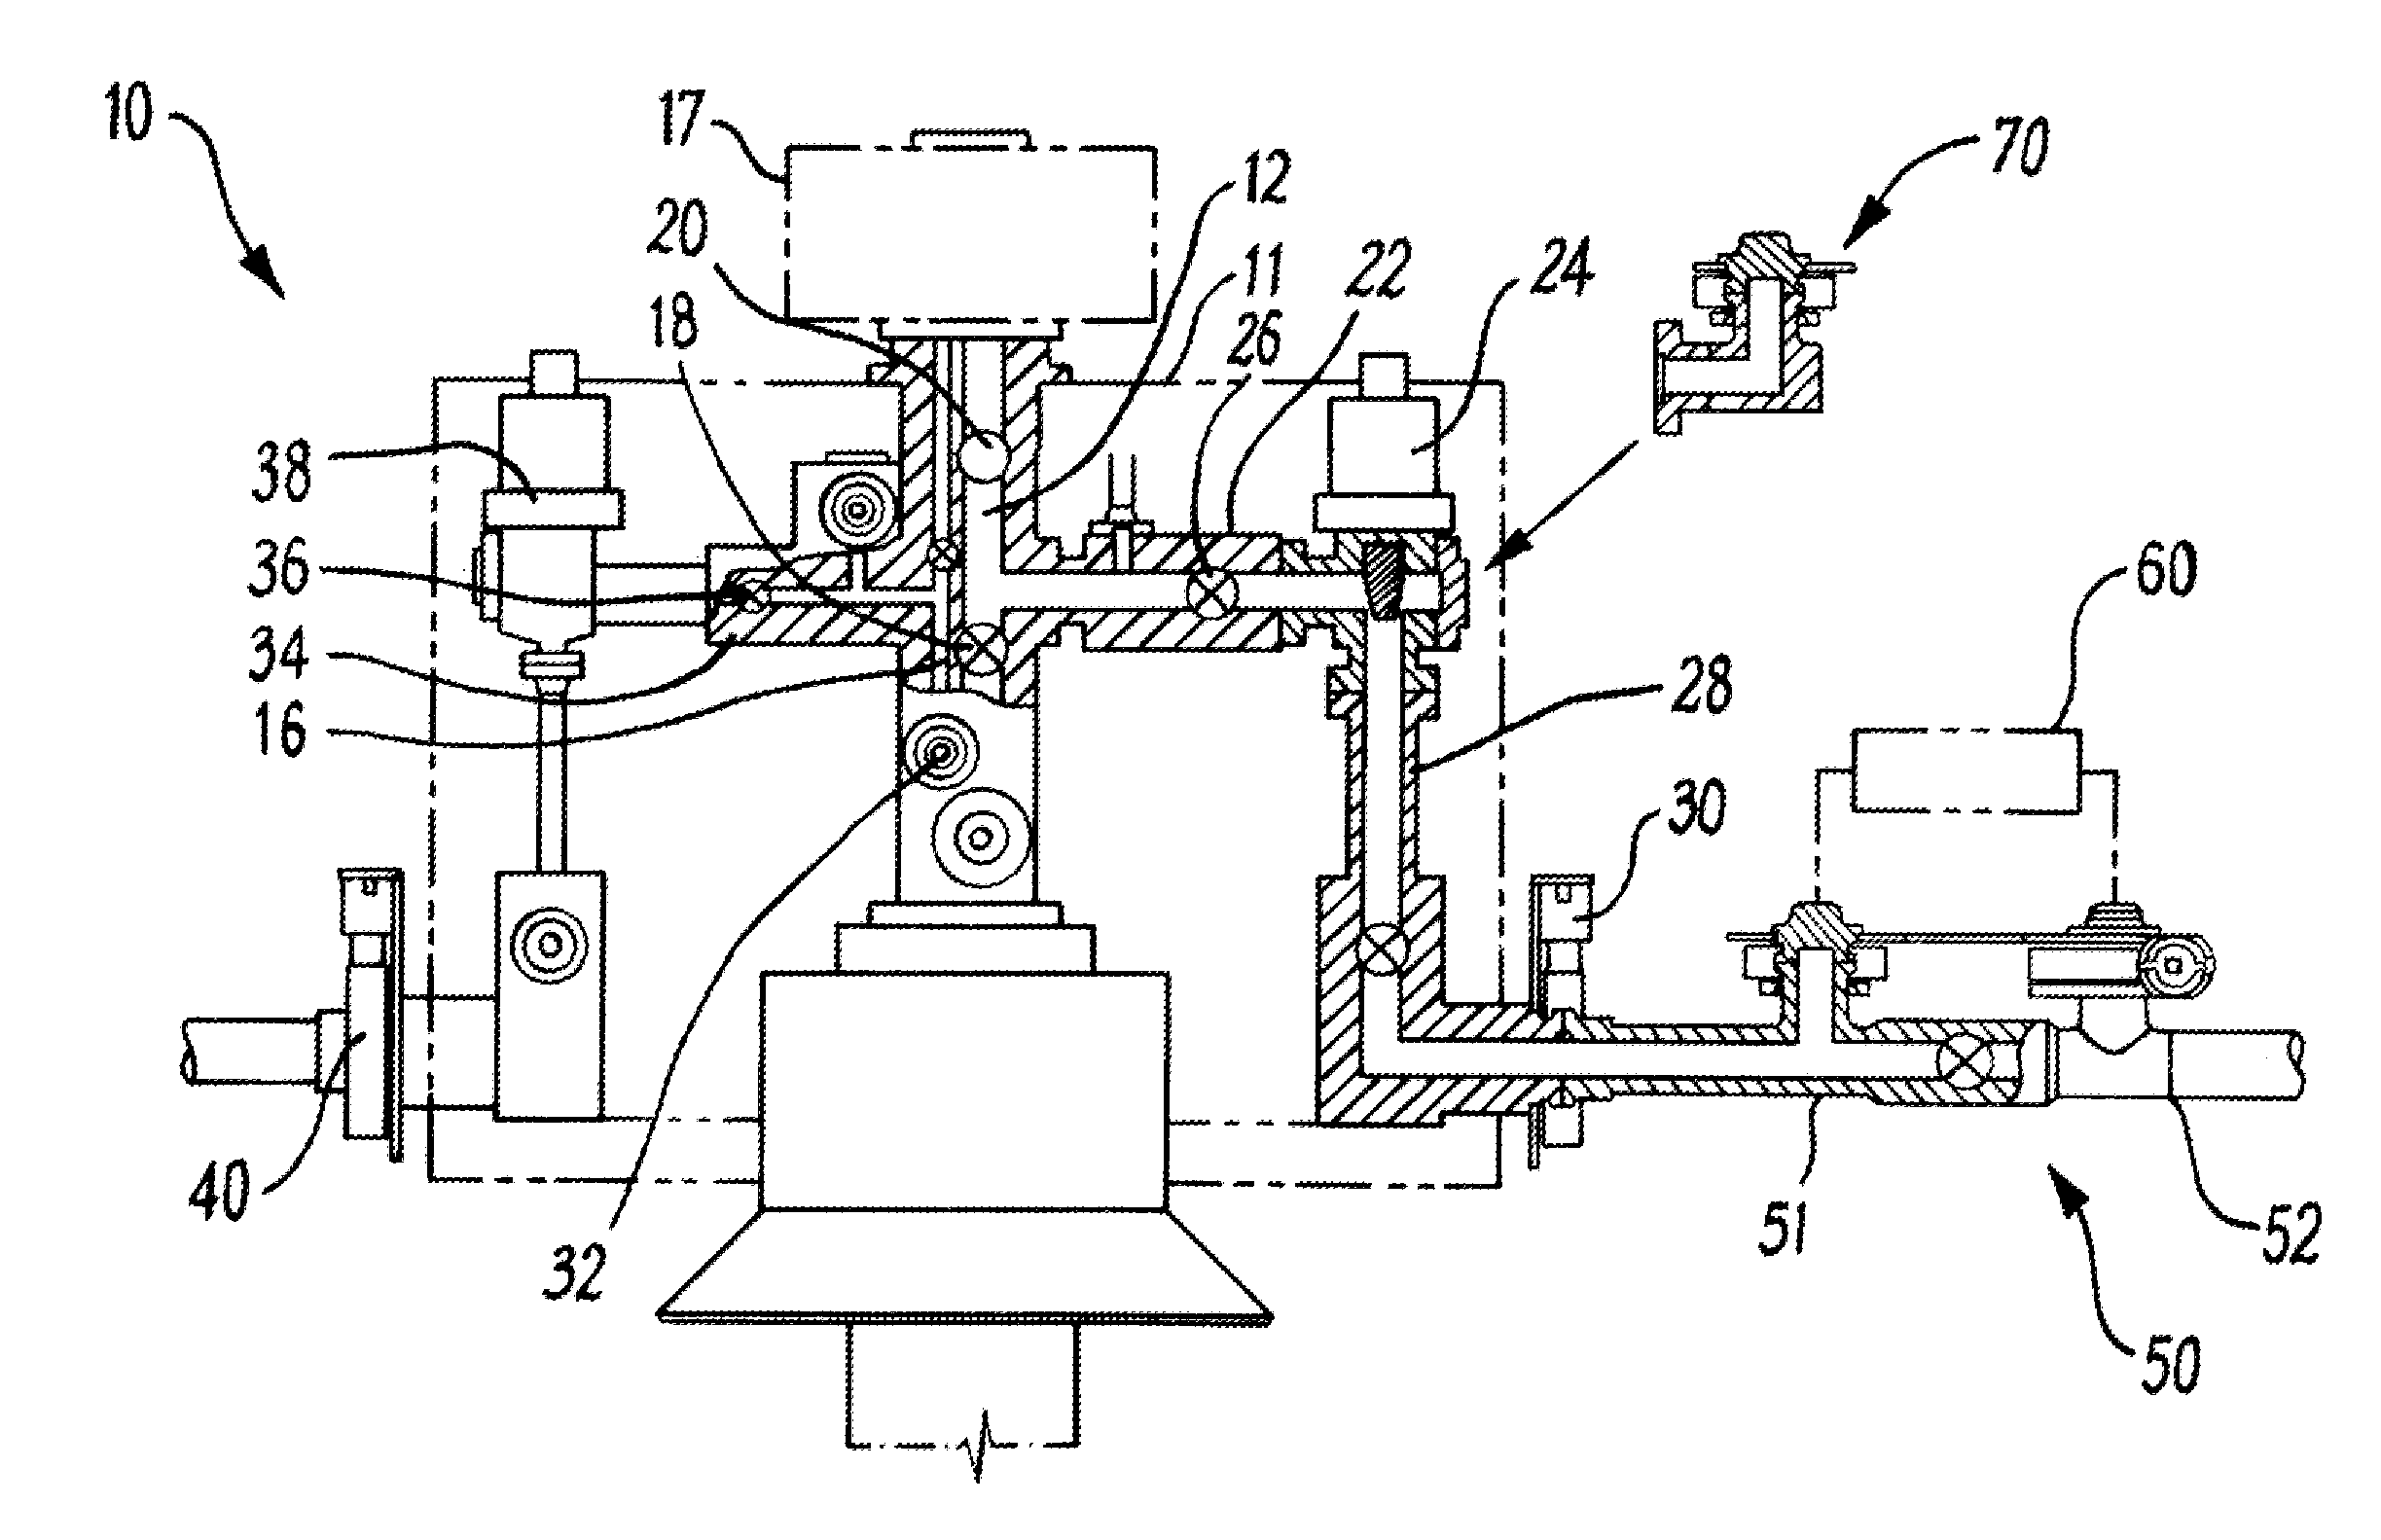 Method and Apparatus for Oil and Gas Operations